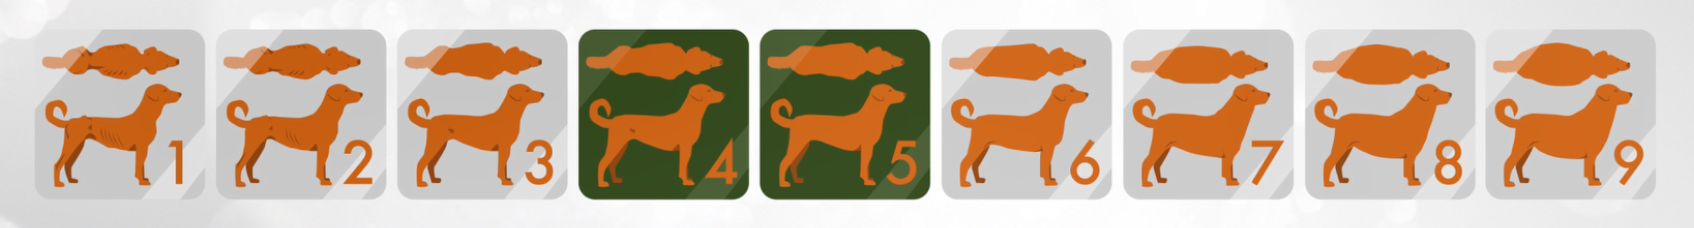 Nine graphics of the top-down and side few of a dog, each graphic showing different body condition scores. The graphics start with a score of one on the left and ends at a 9 score on the right.